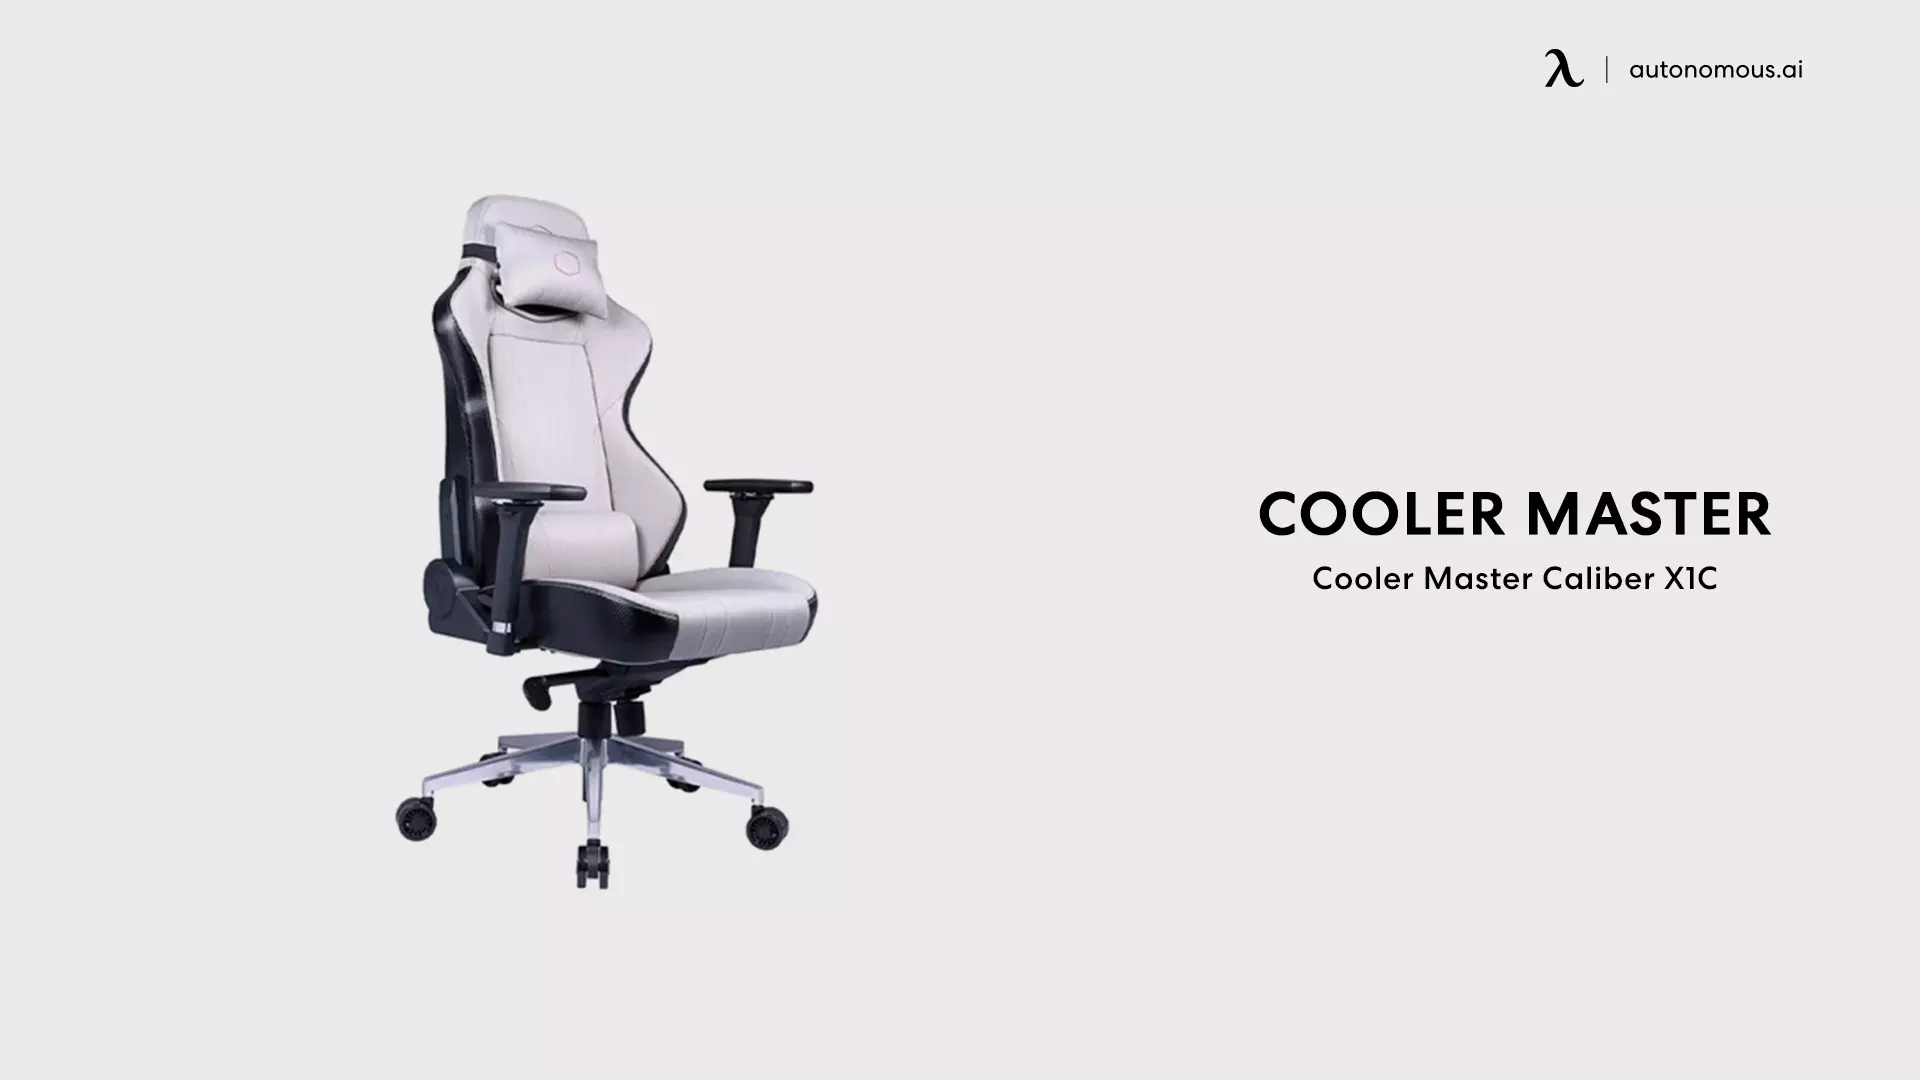 Cooler Master Caliber X1C - wide desk chairs